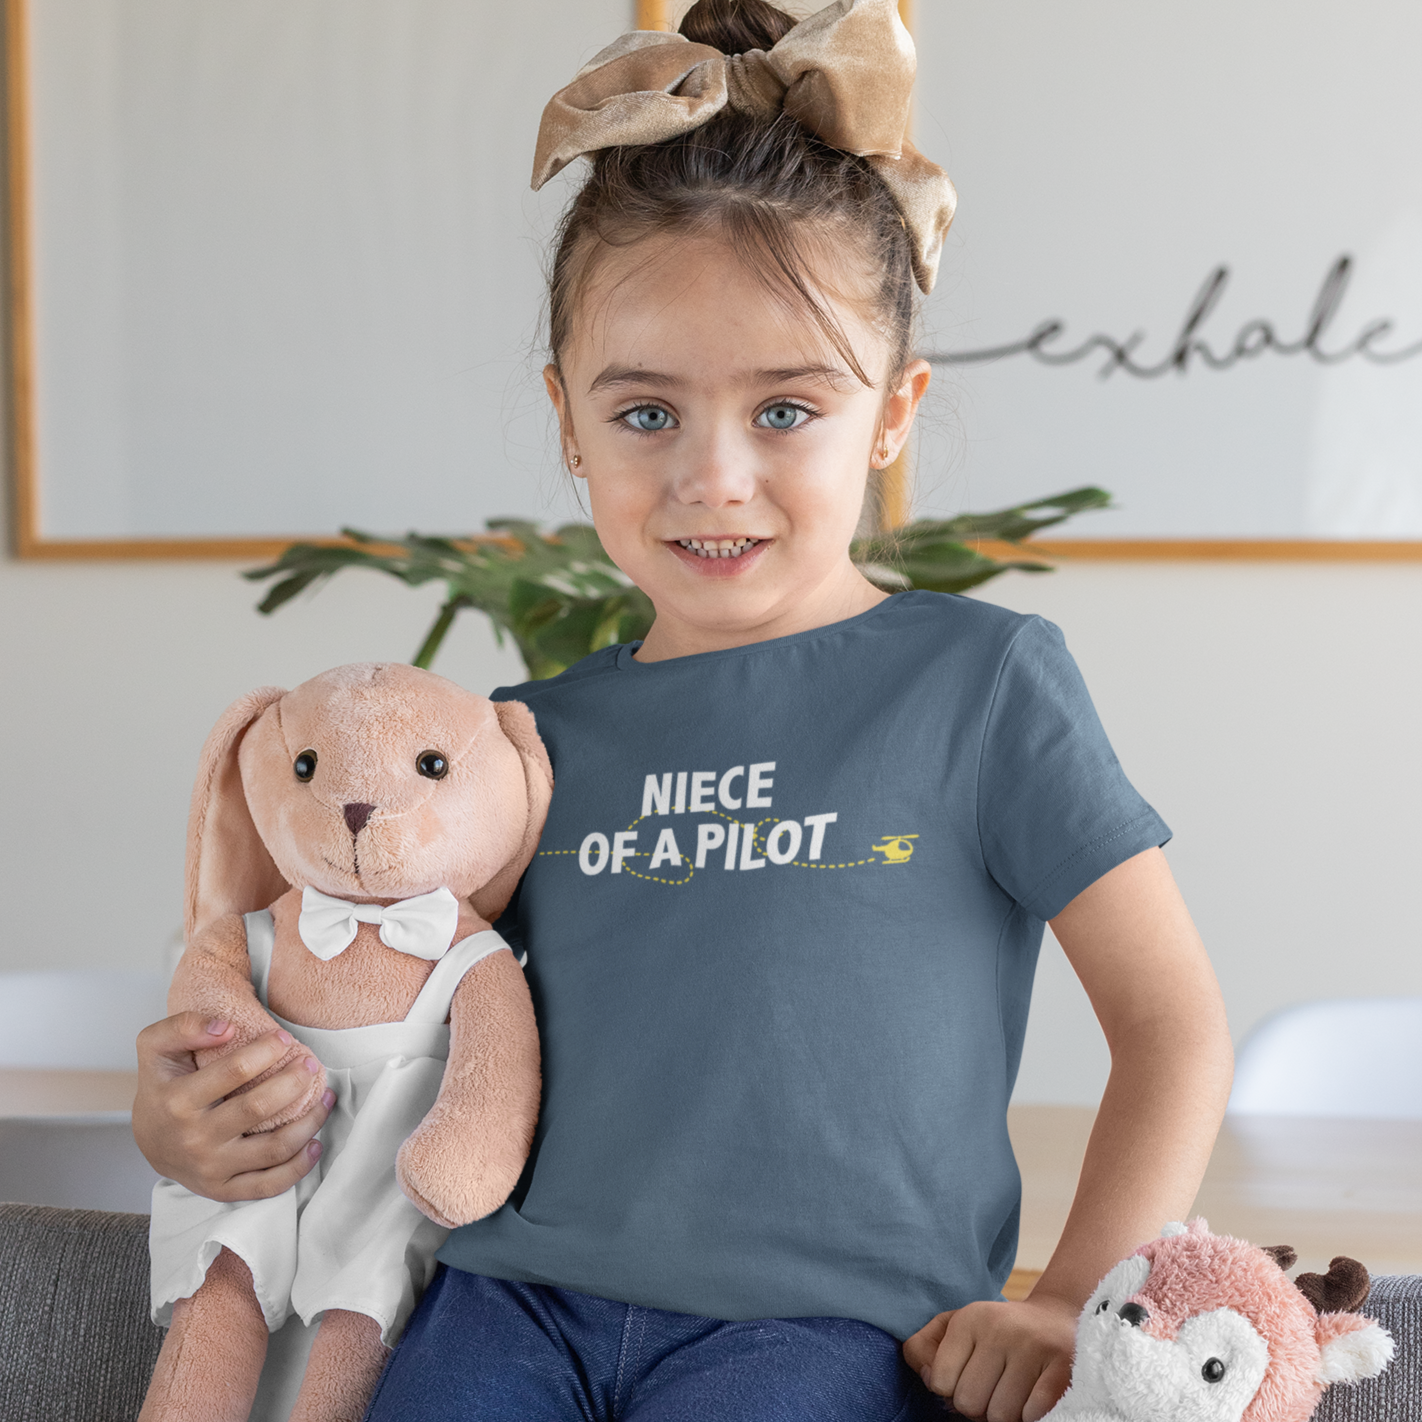 Niece of the/a Pilot - Baby & Toddler T-shirts